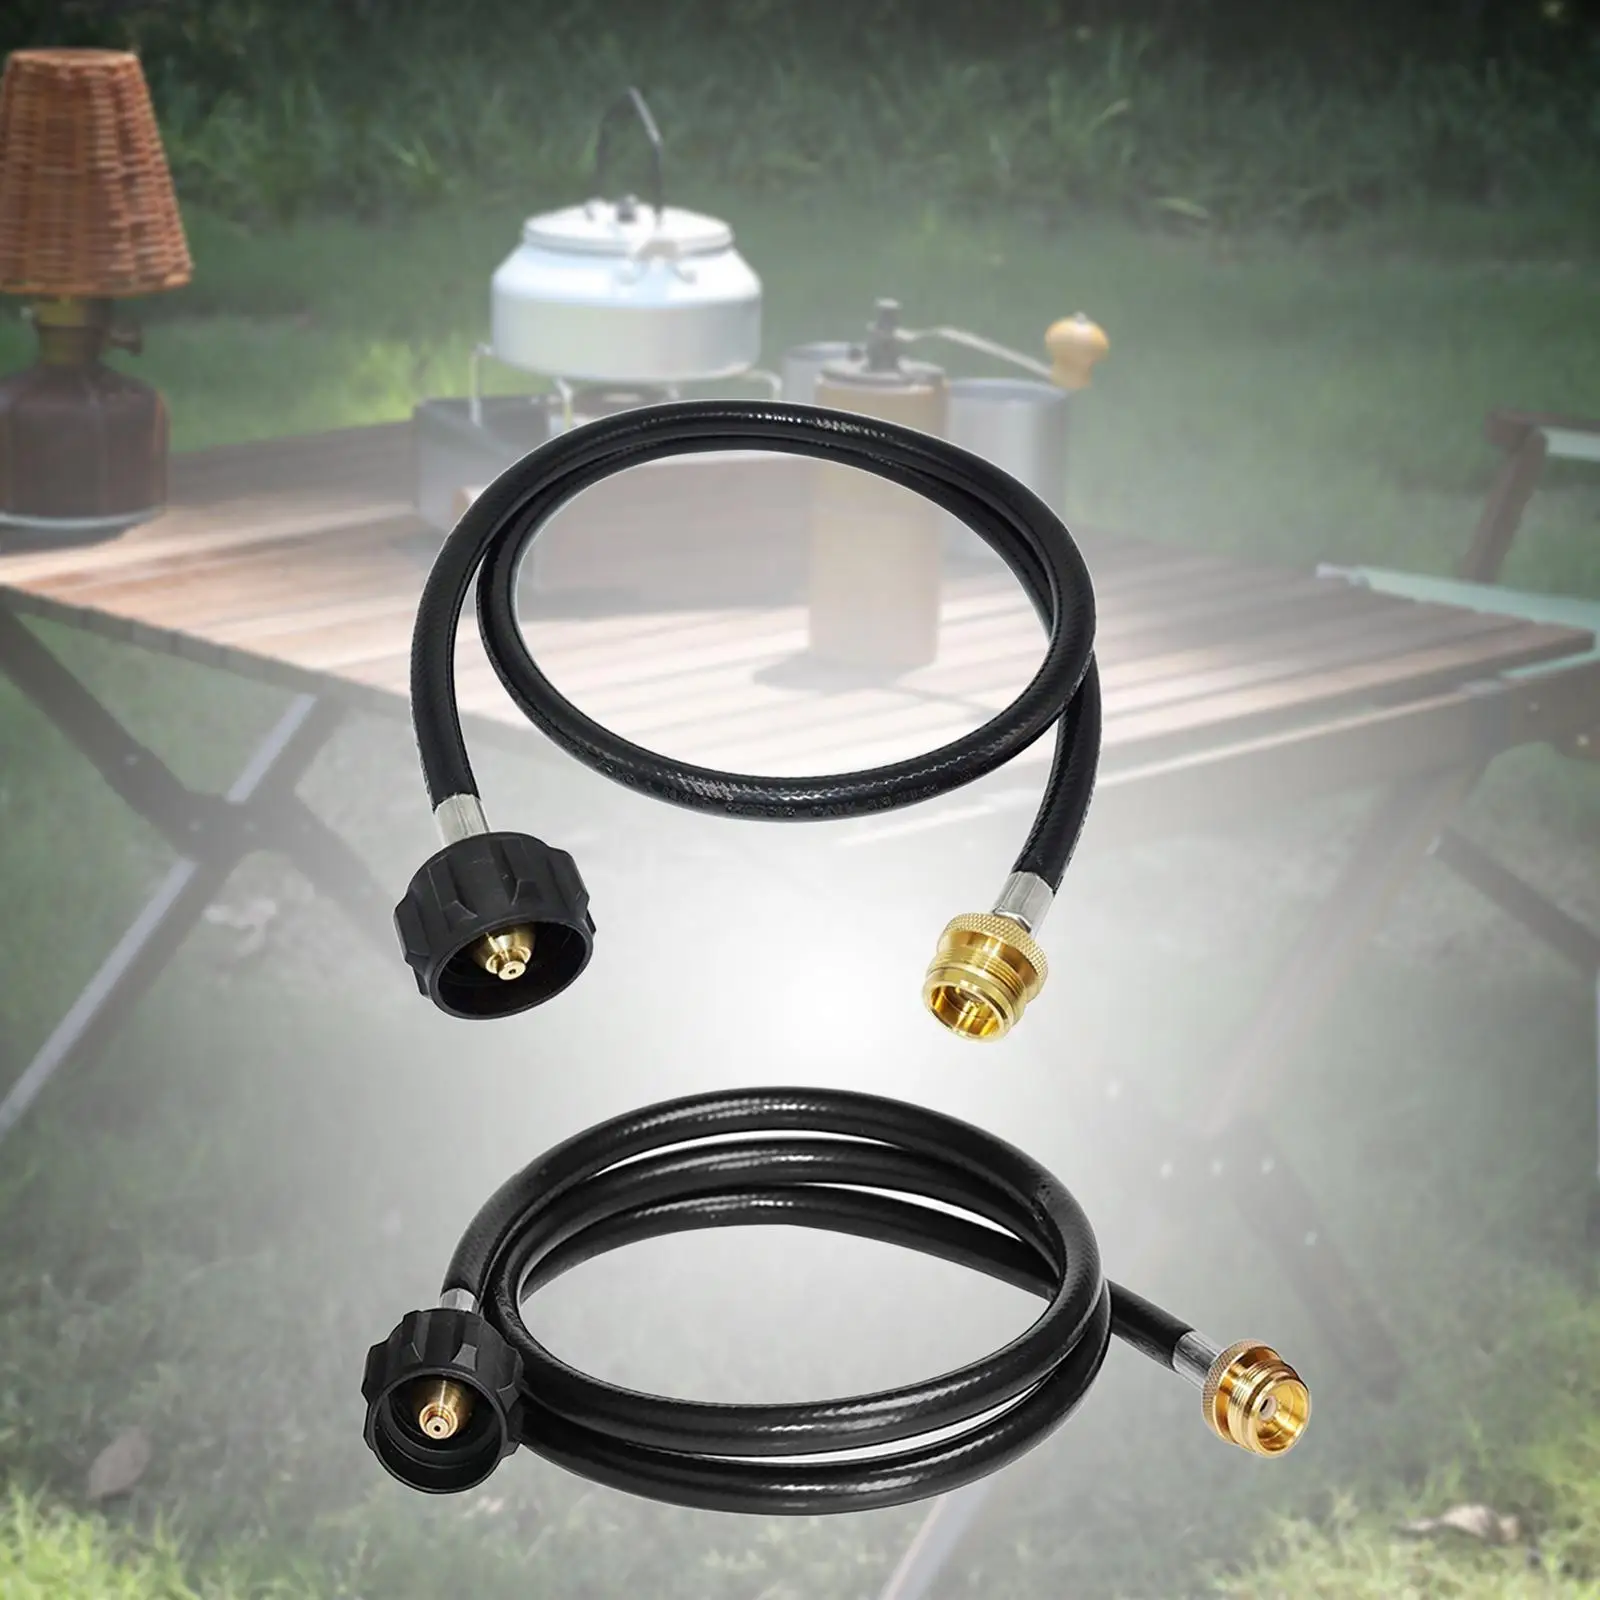 Propane Adapter Hose Qcc Converter Cooking Supplies Propane Refill Adapter Burner for BBQ Camping Hiking Outdoor Grills Cooking